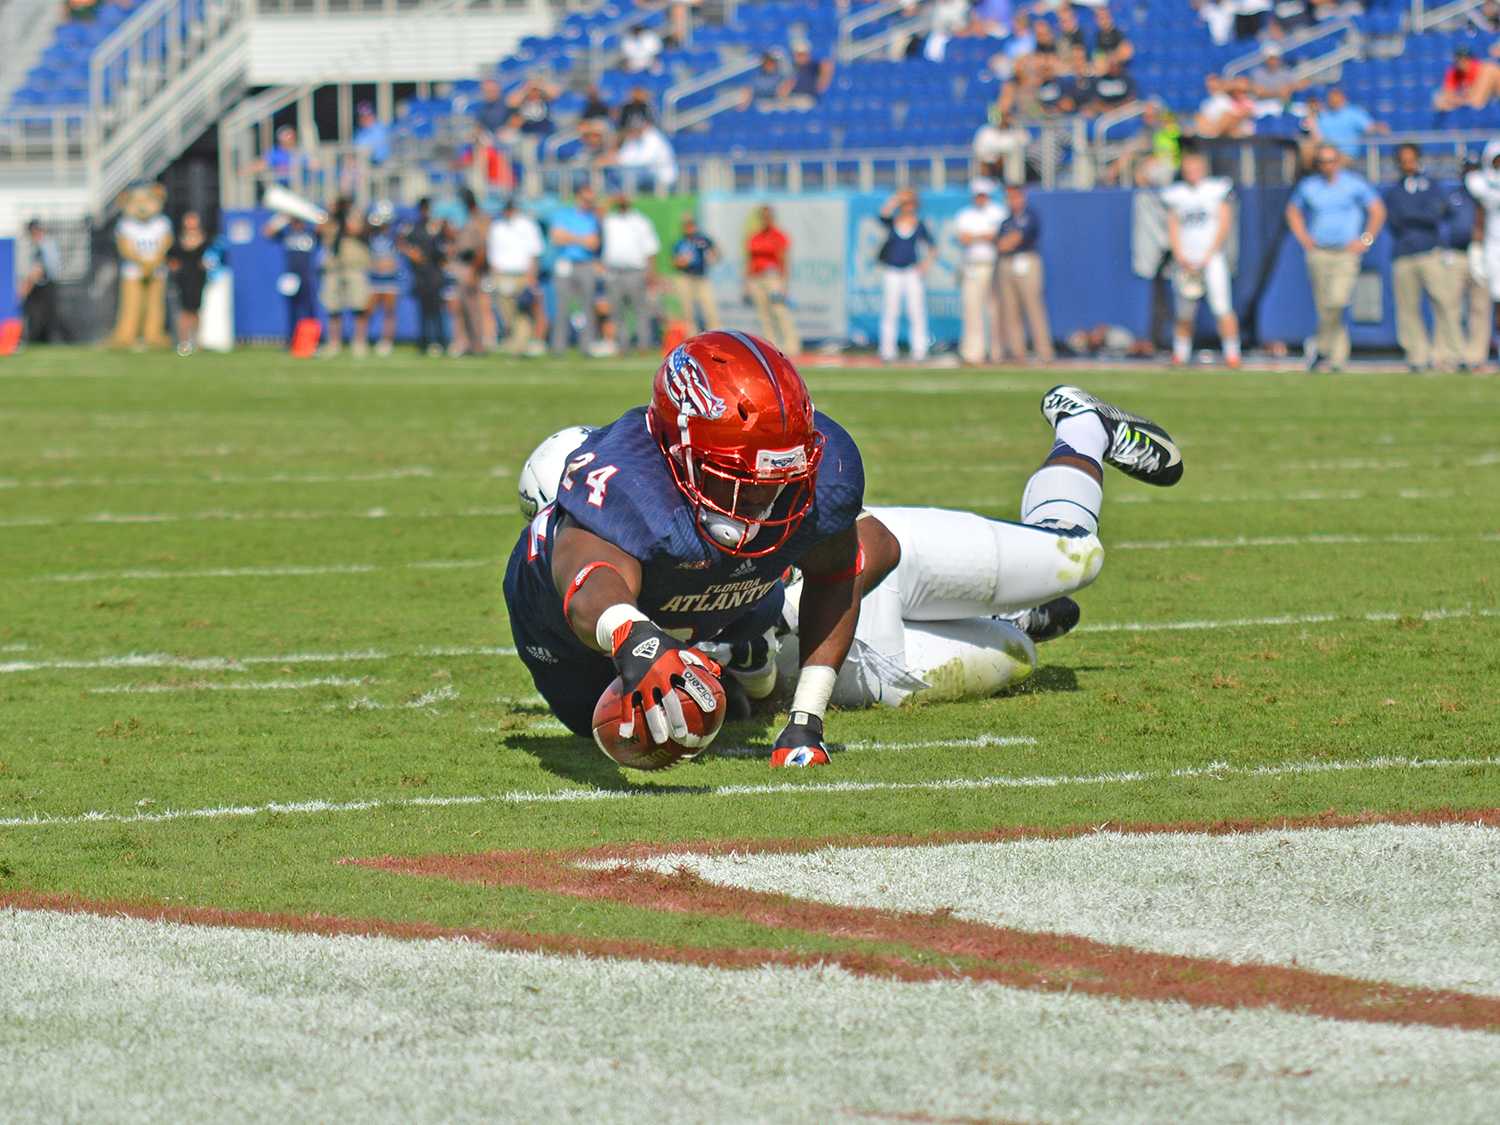 Senior running back Tony Moore scores the Owls’ first touchdown against Old Dominion. Moore led the team in rushing with 83 yards.  